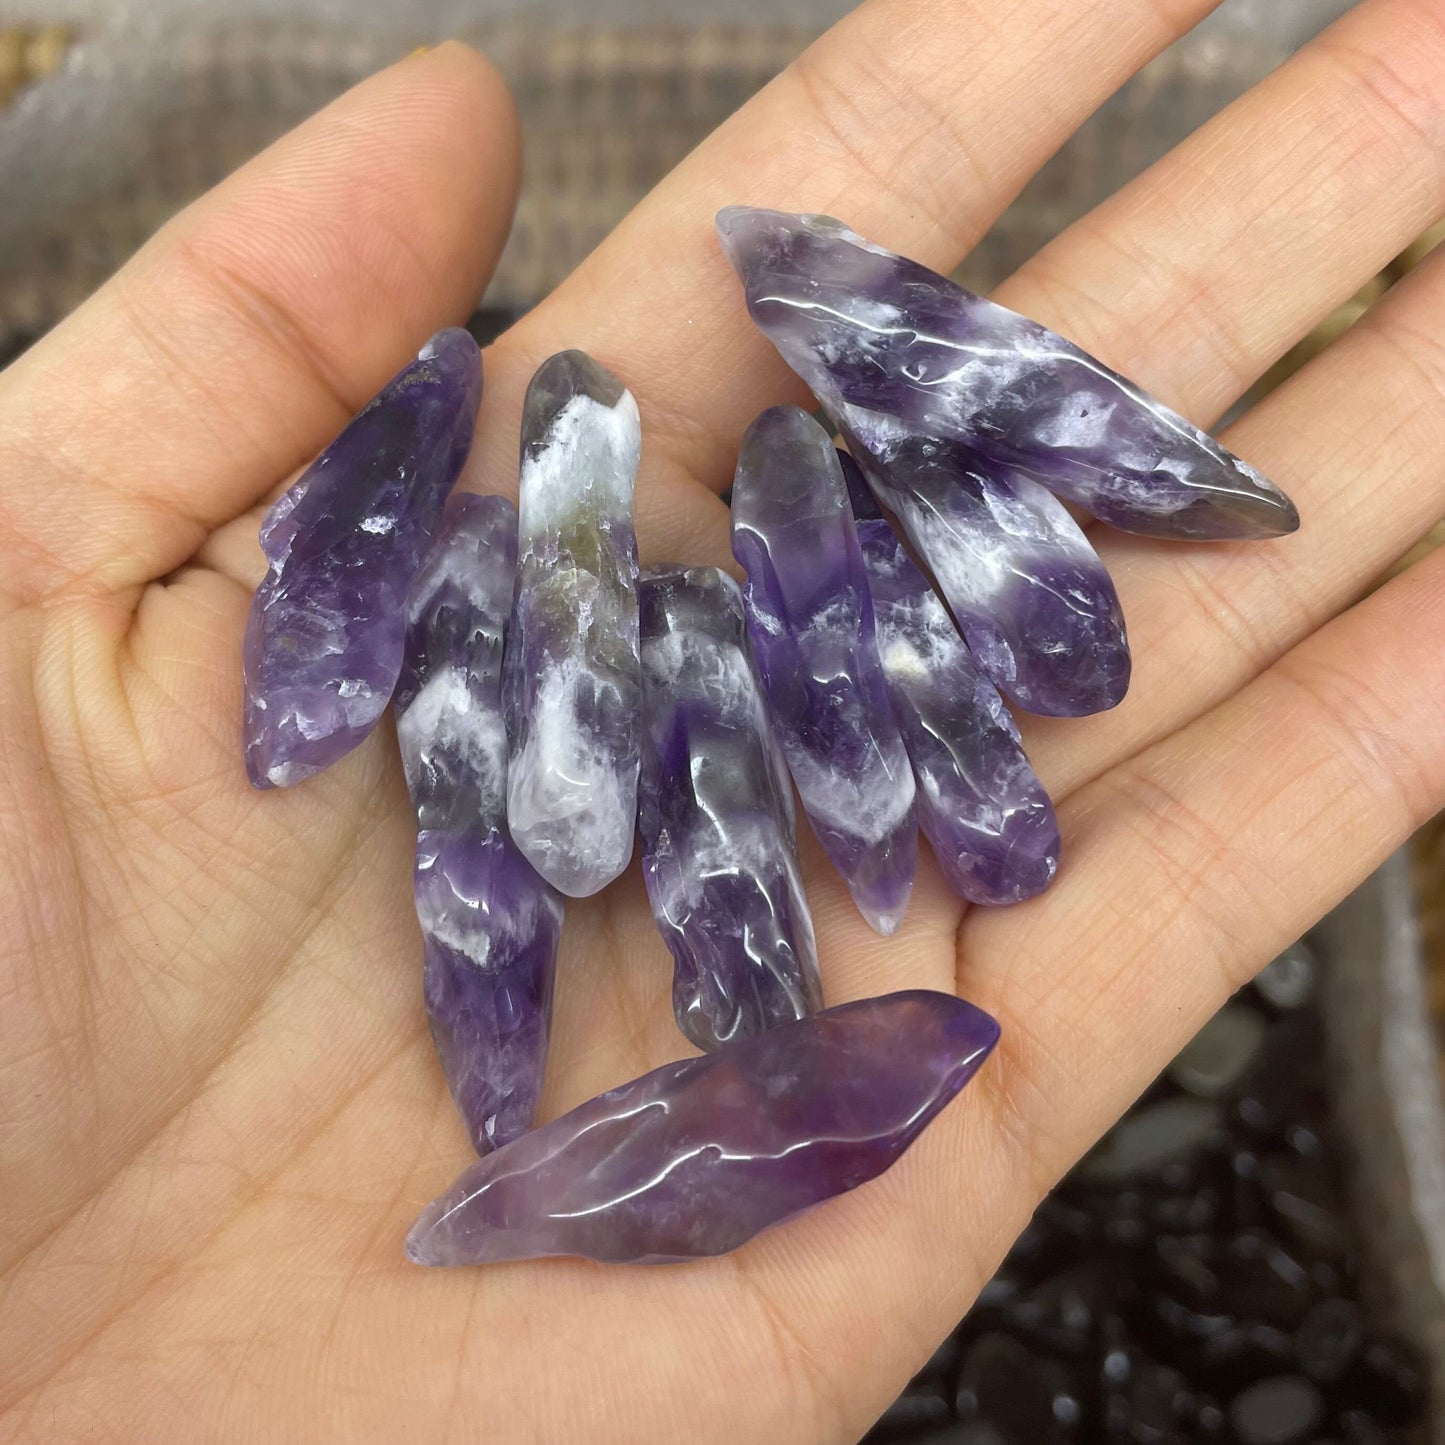 Natural Amethyst Quartz Crystal Cluster - Healing Stone and Home Decor Collectible